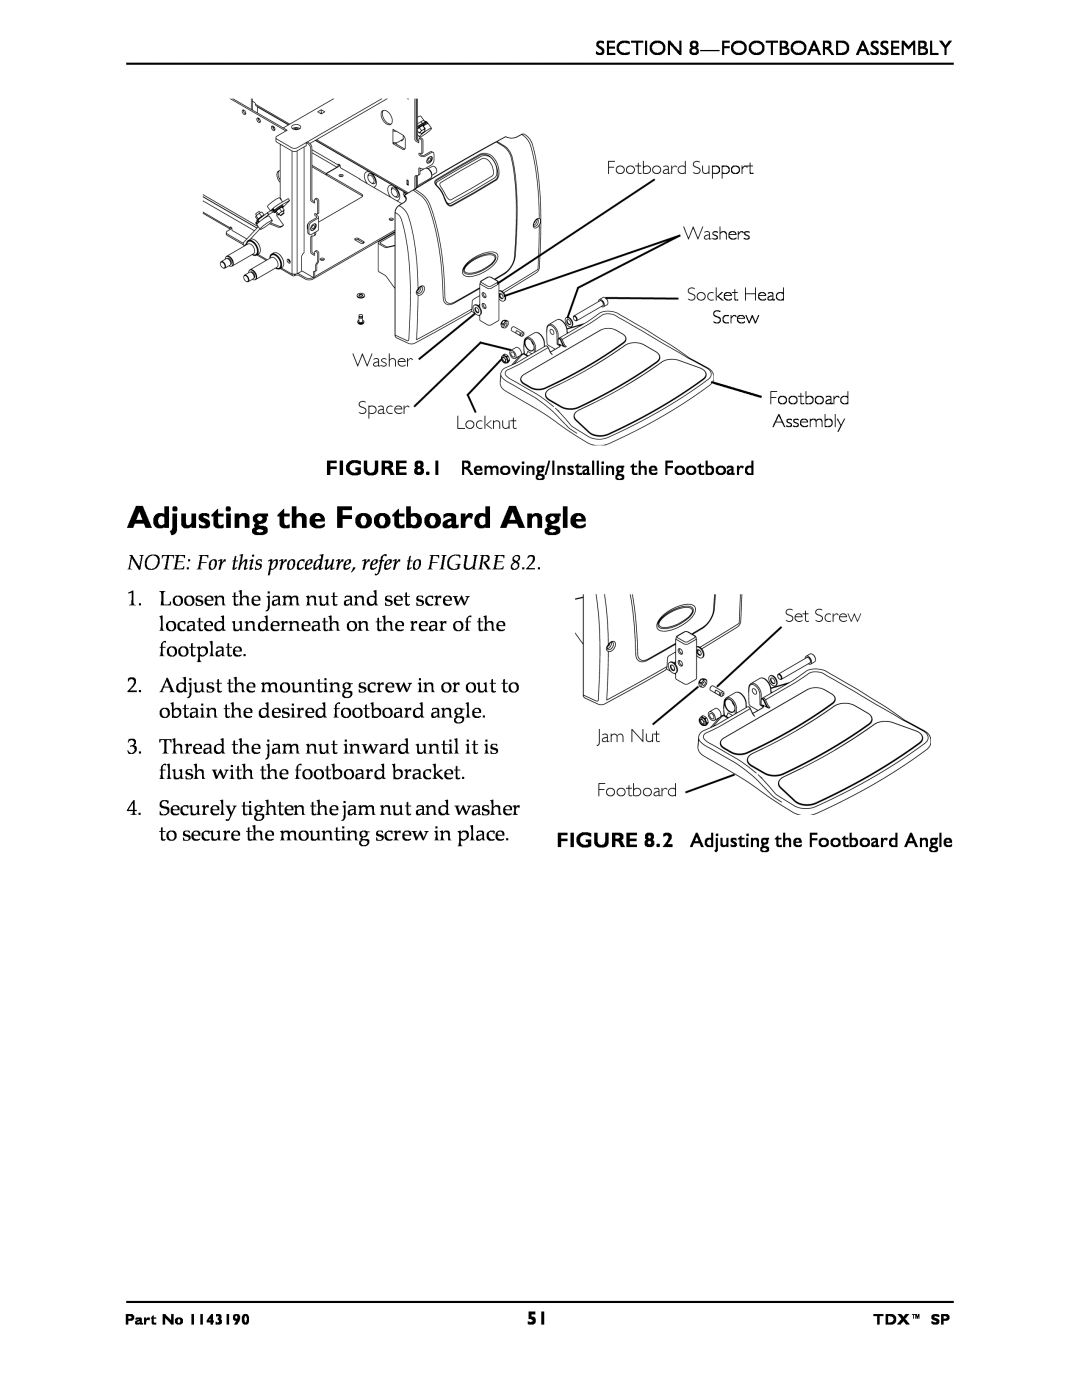 Invacare SP Adjusting the Footboard Angle, NOTE For this procedure, refer to FIGURE, Footboard Support, Washers, Locknut 